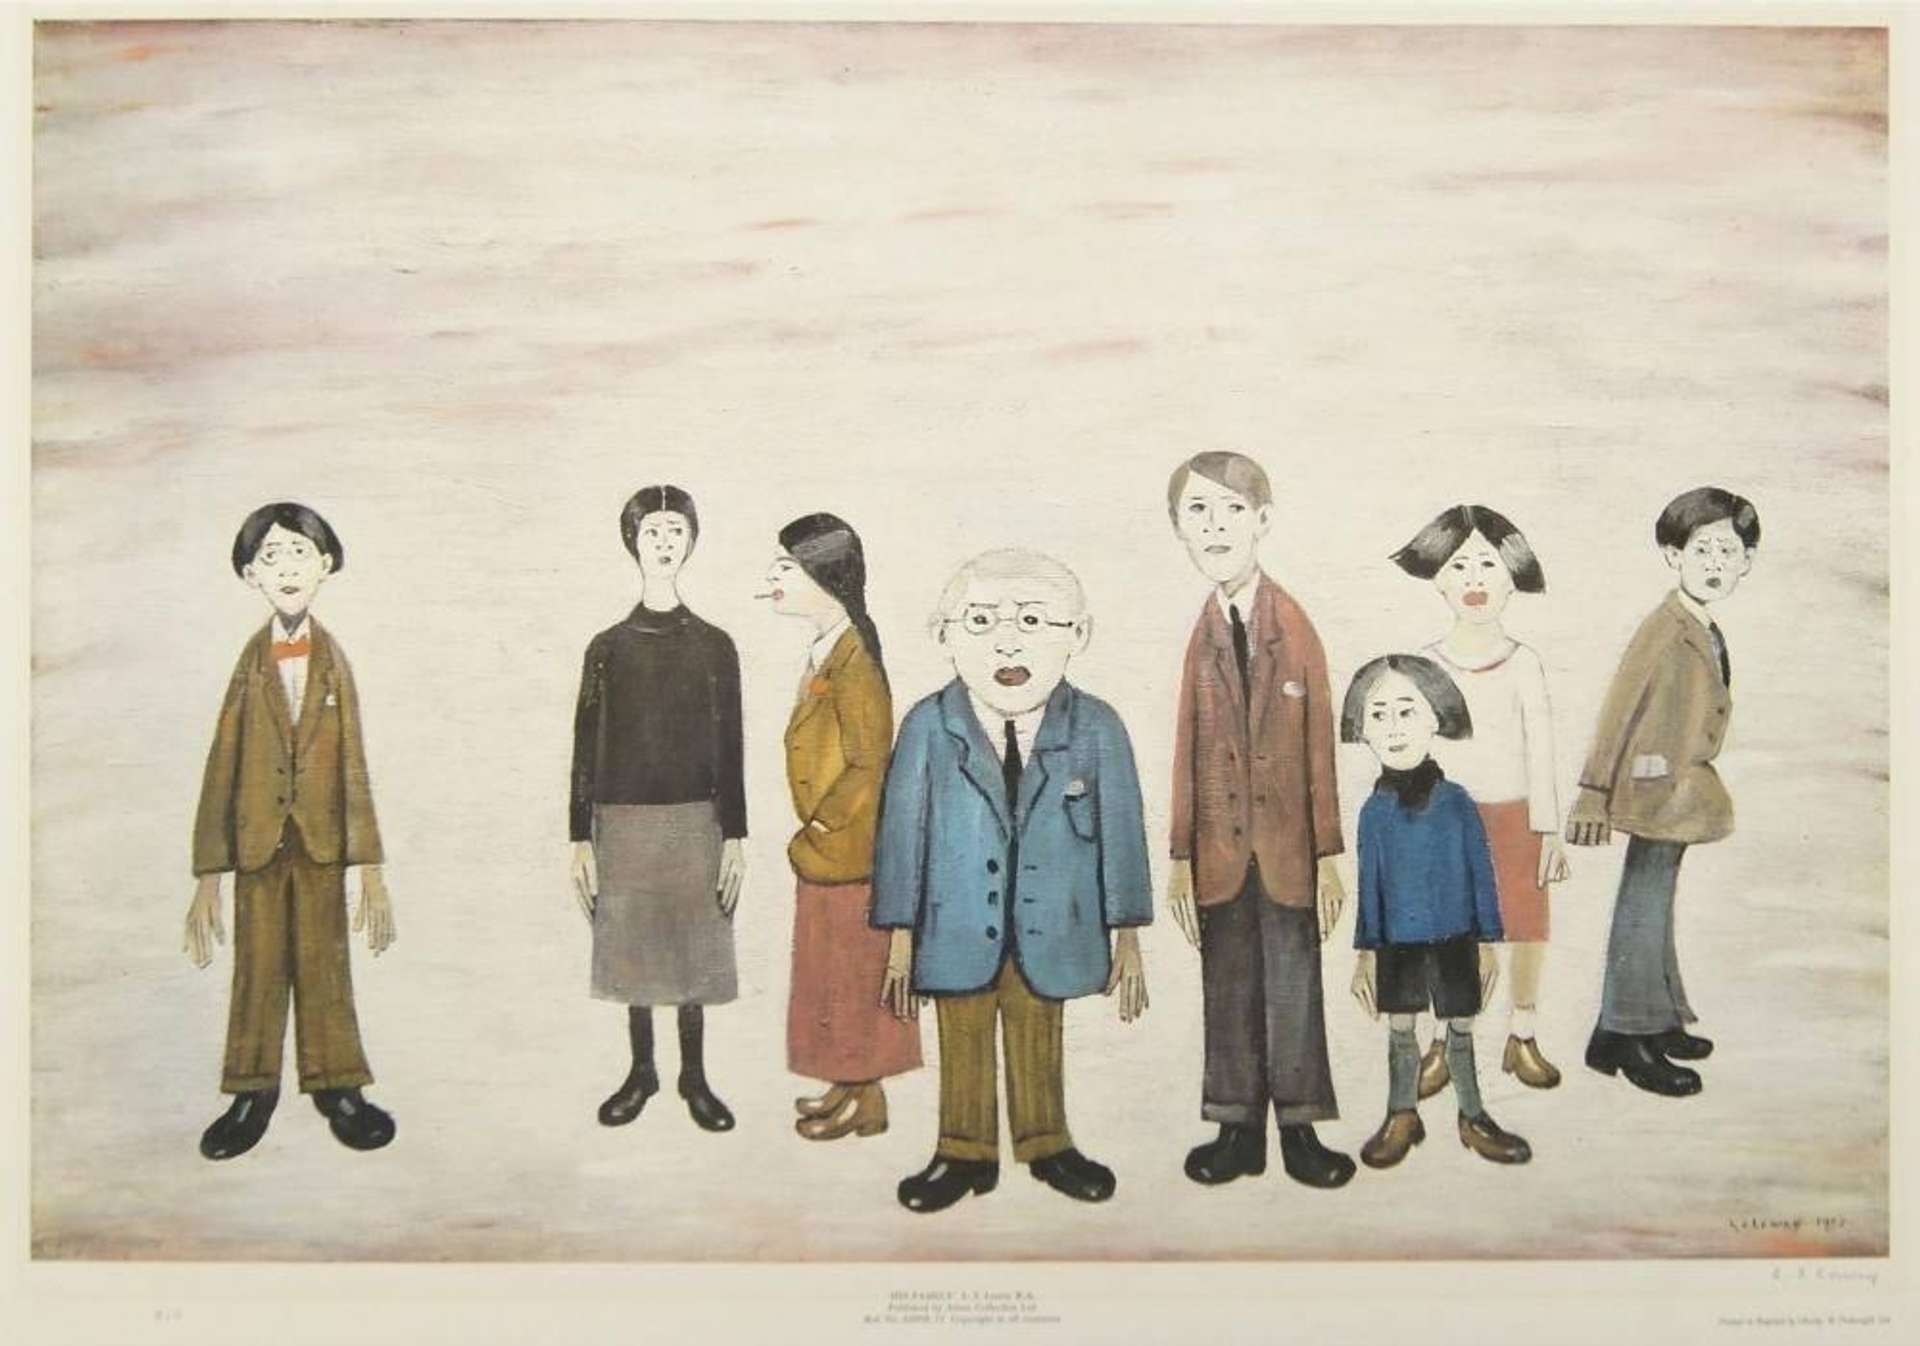 His Family - Signed Print by L. S. Lowry 1972 - MyArtBroker